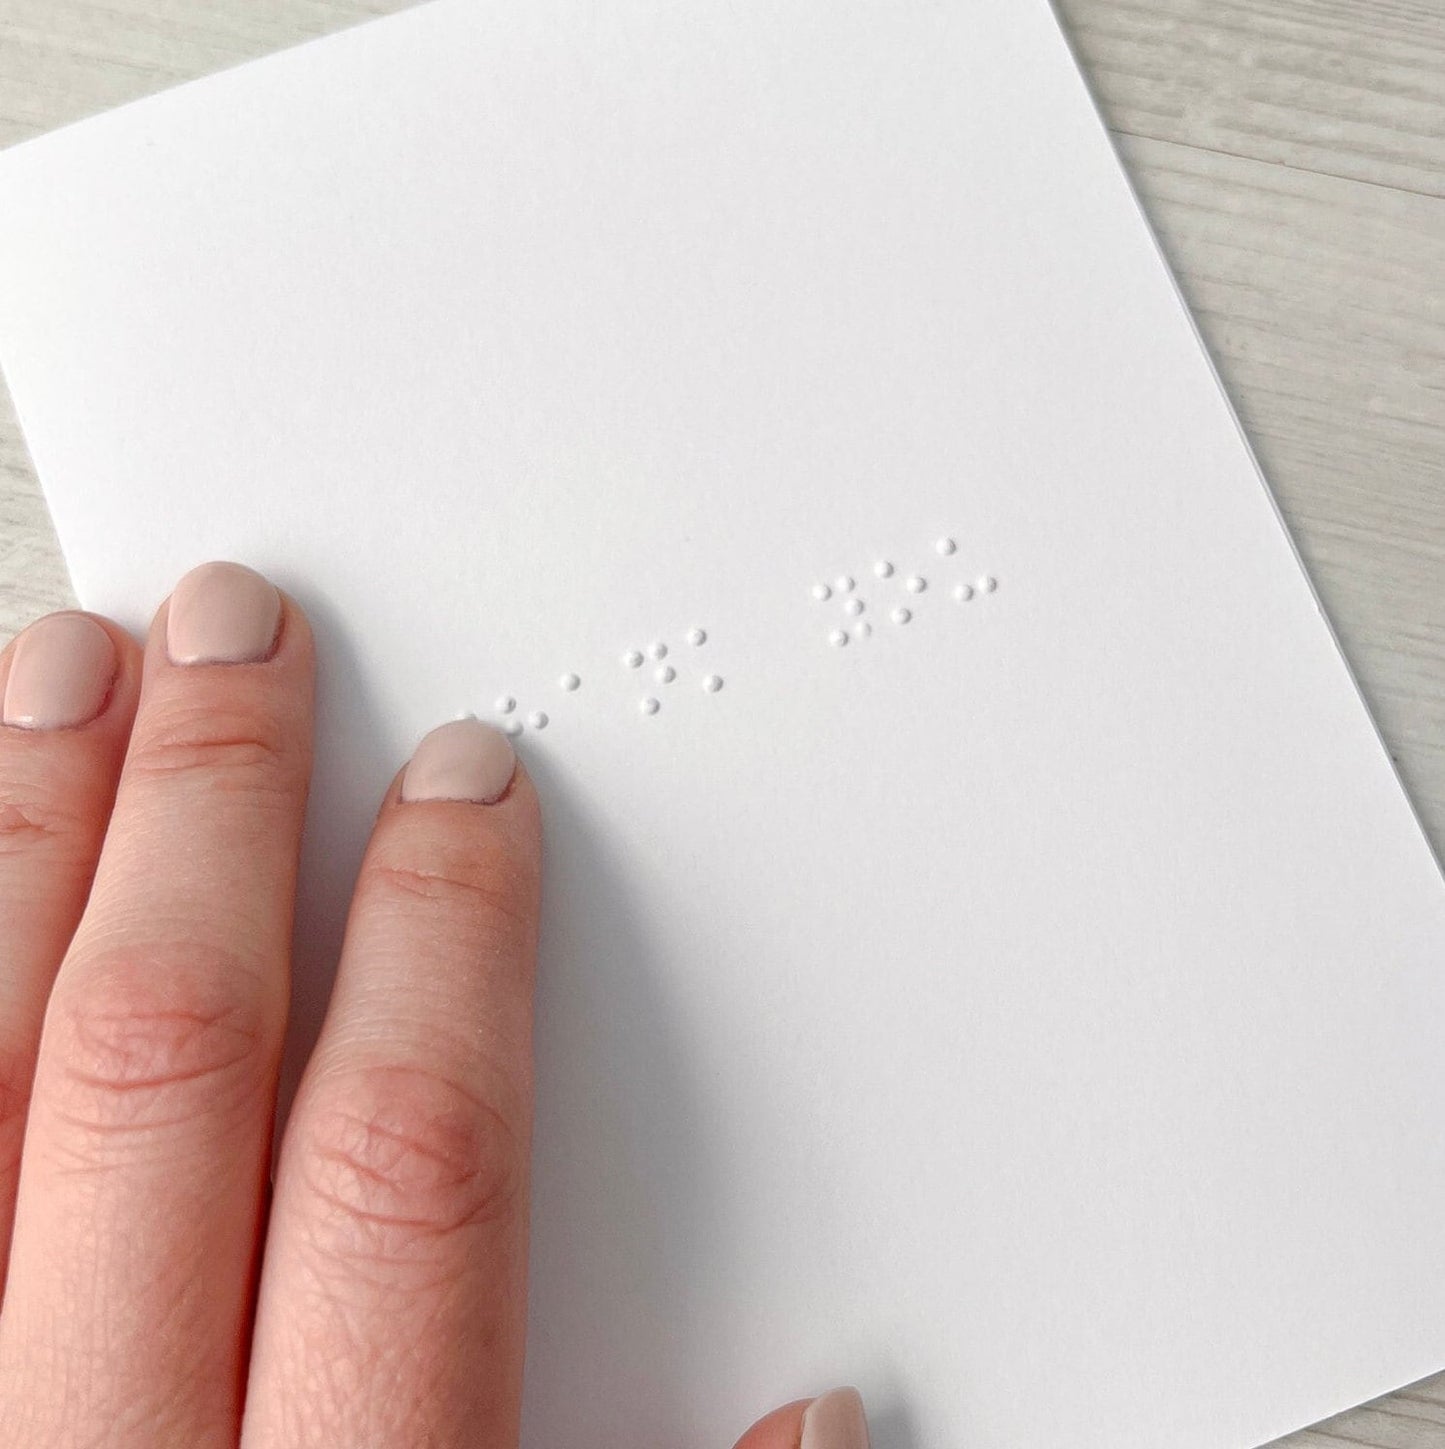 A white braille card with thank you written in lower case braille, a hand wearing pink nail varnish is on top of the card